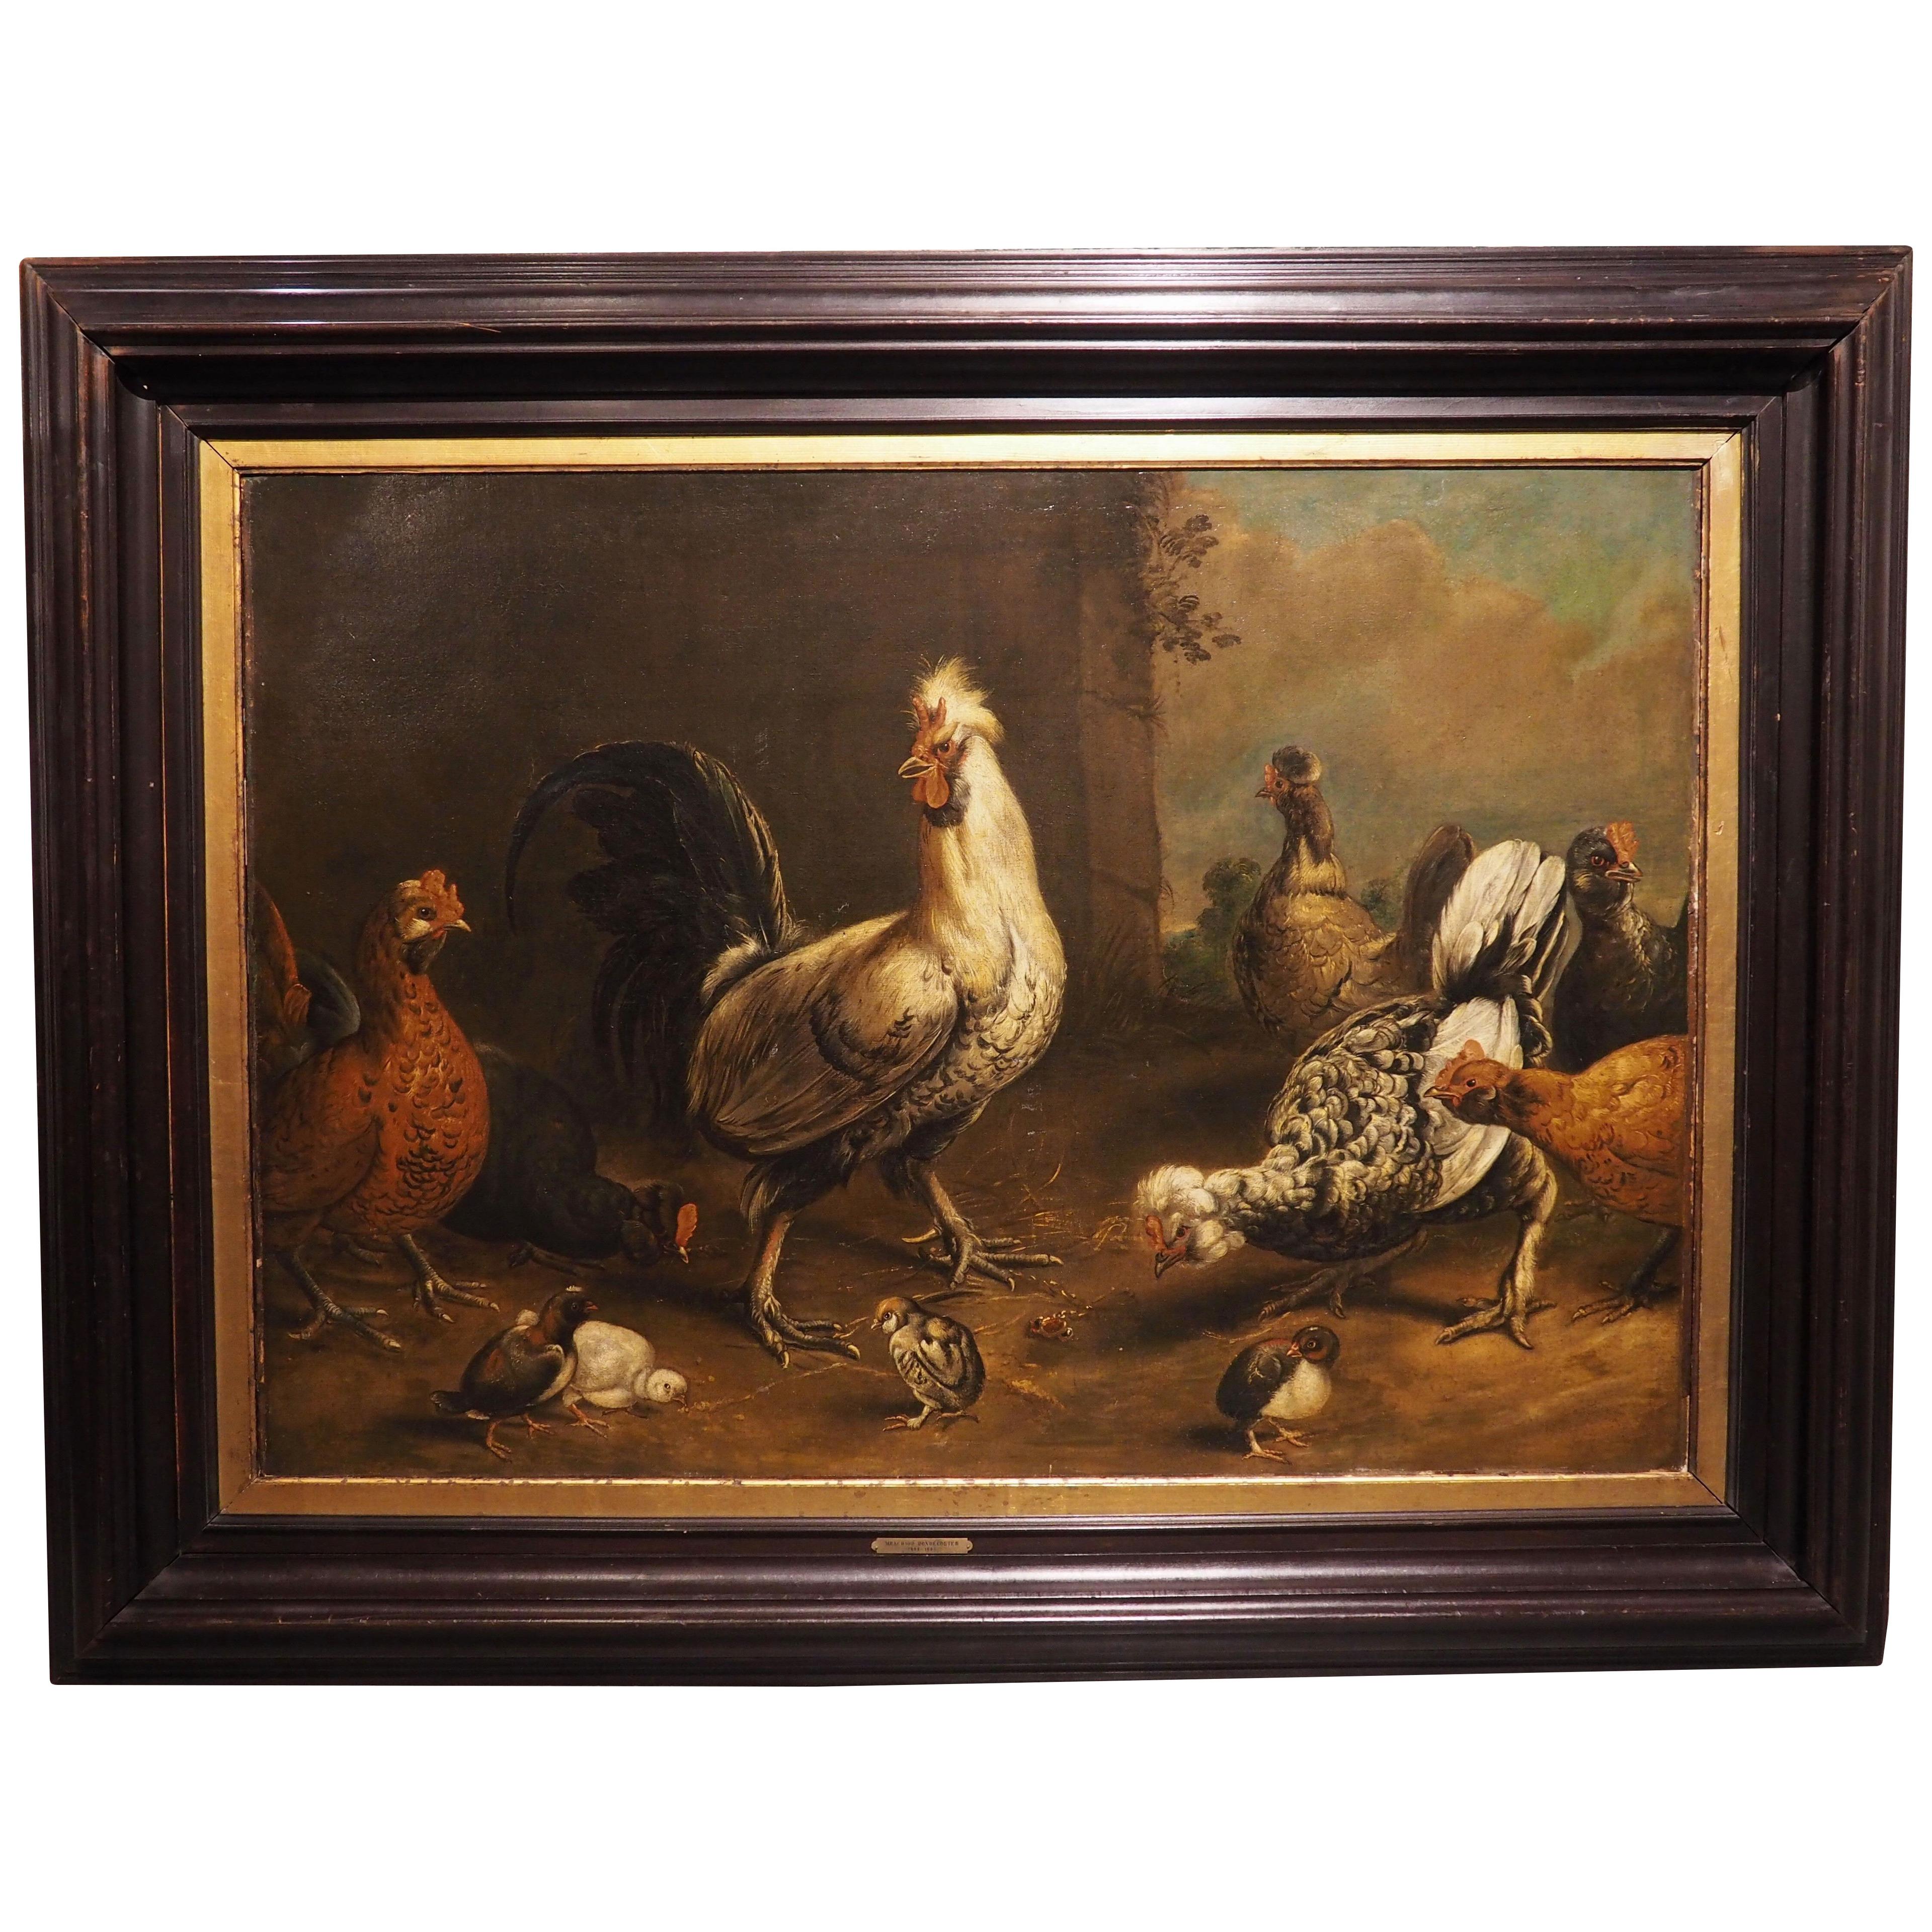 17th C. Dutch Painting of a Flock of Chickens, Attrib. to Melchior Hondecoeter